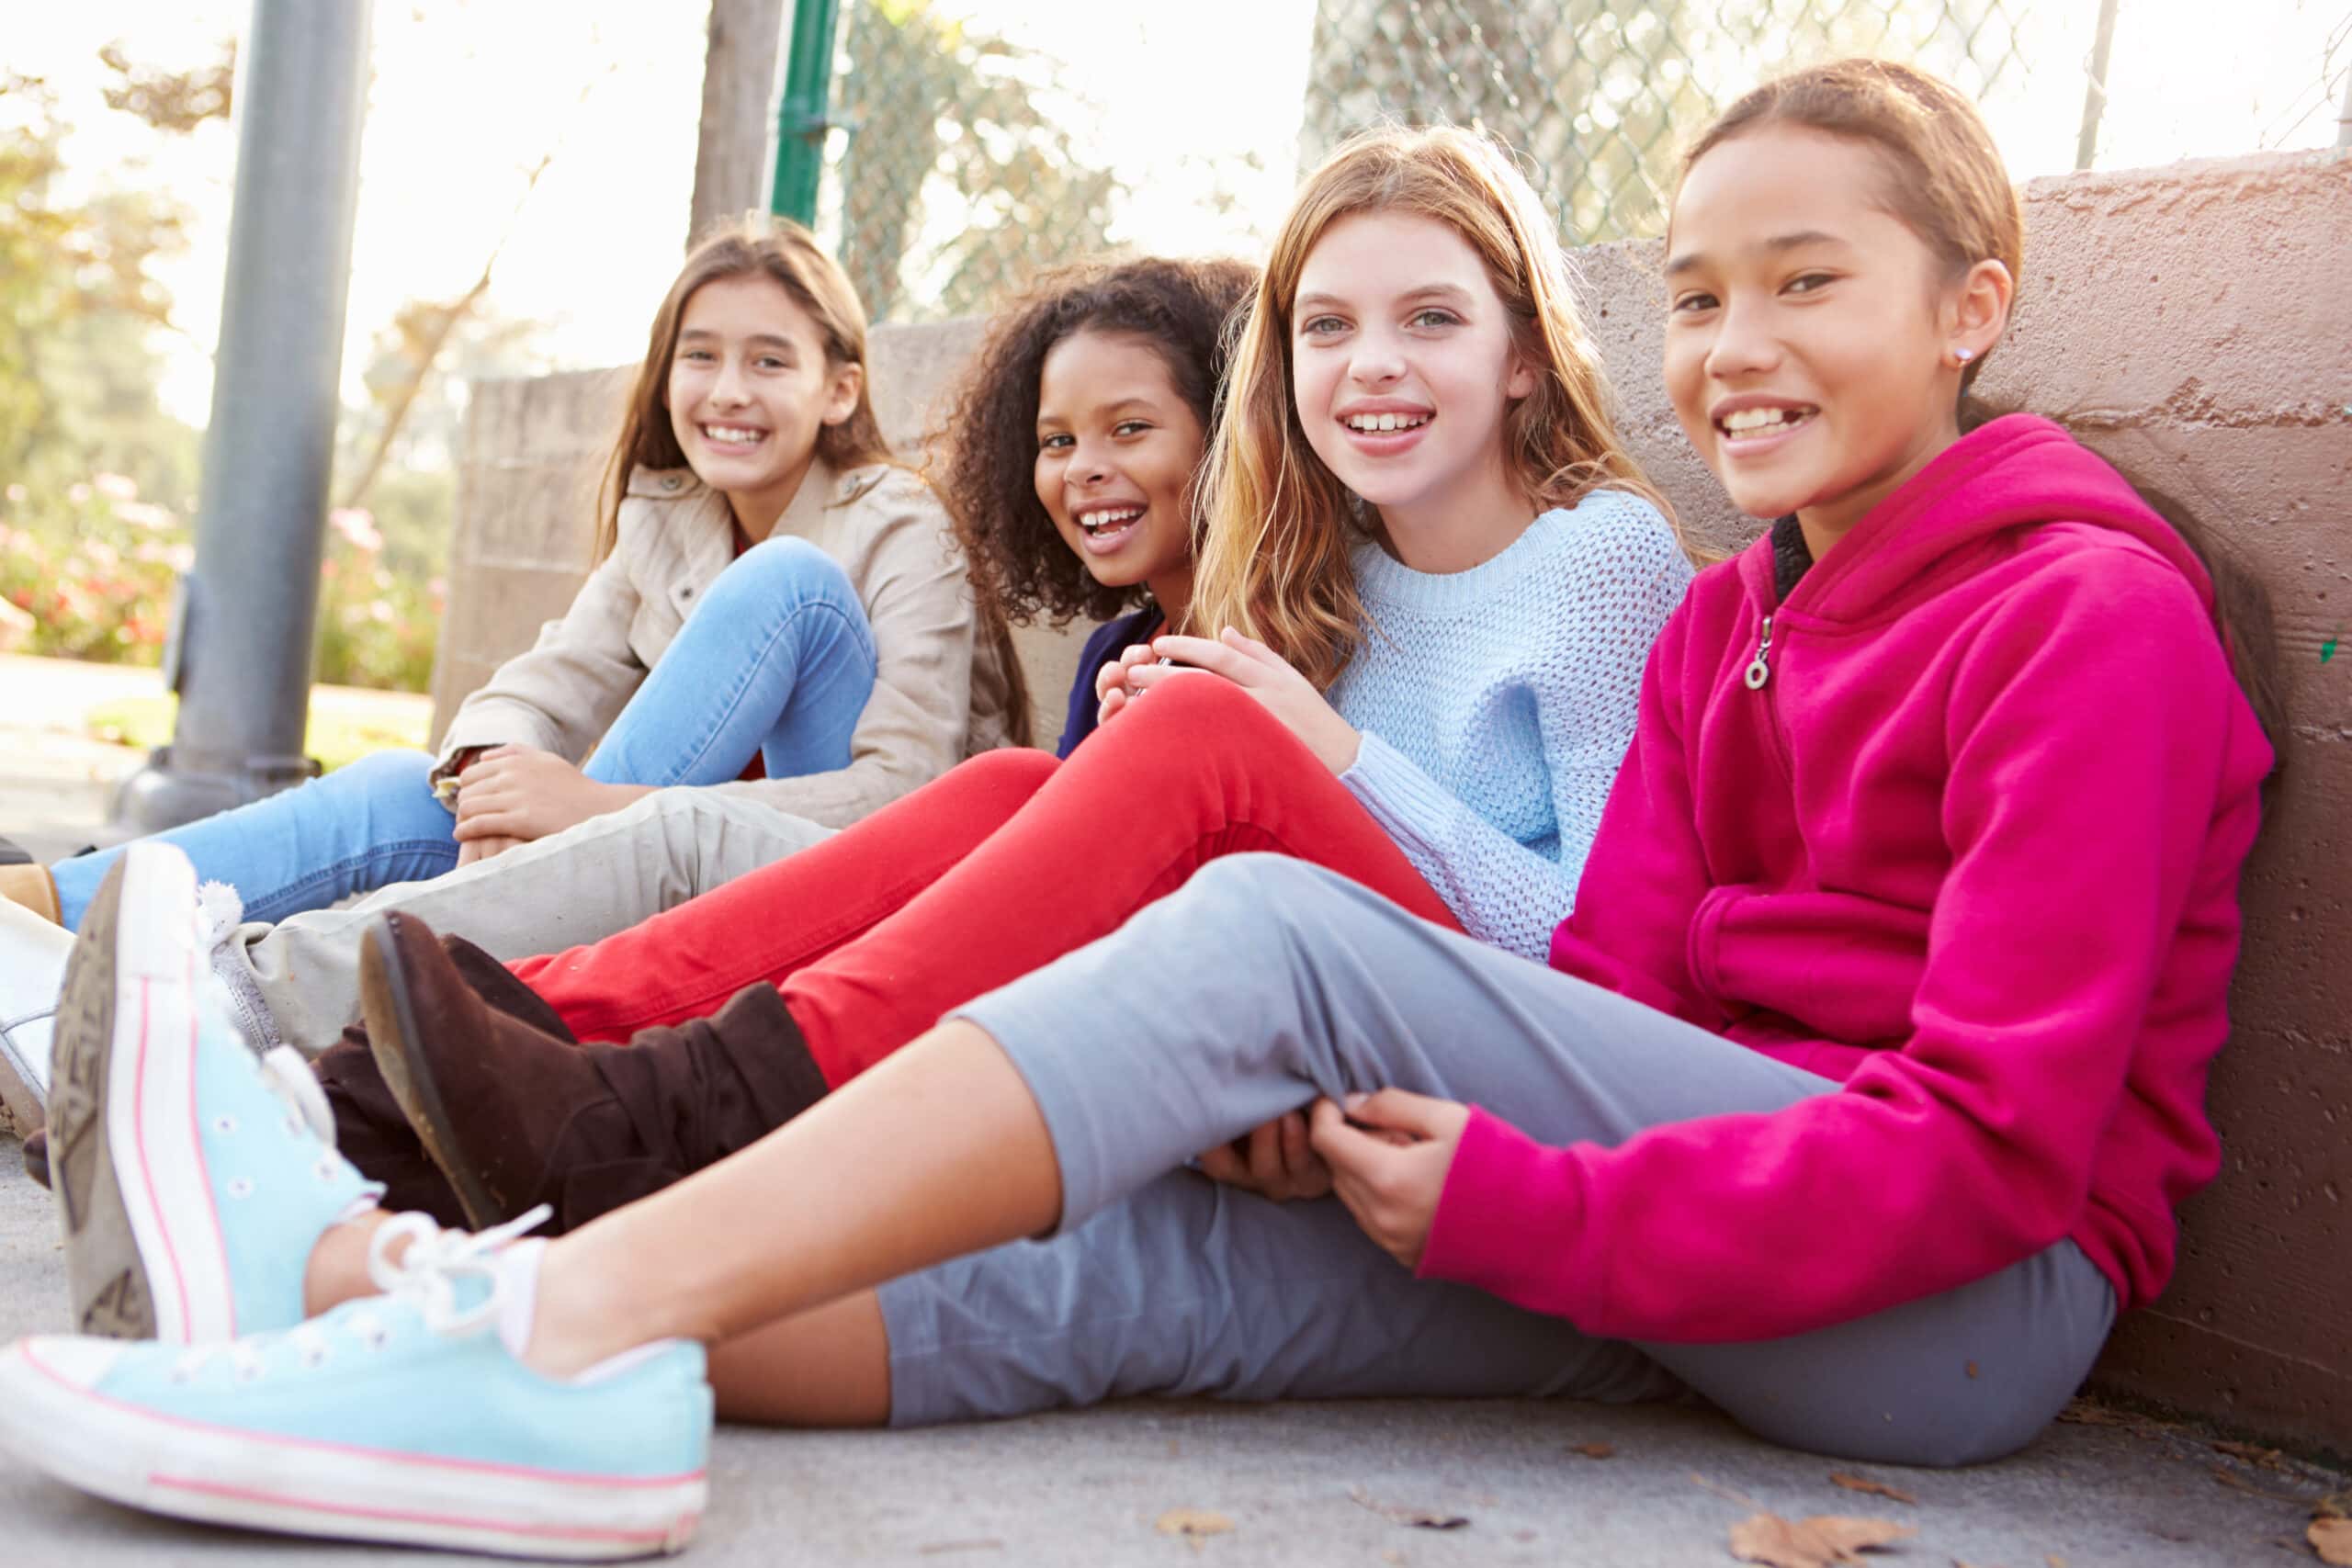 UAMS is holding its Girlology puberty session on March 12 for girls ages 8-14.